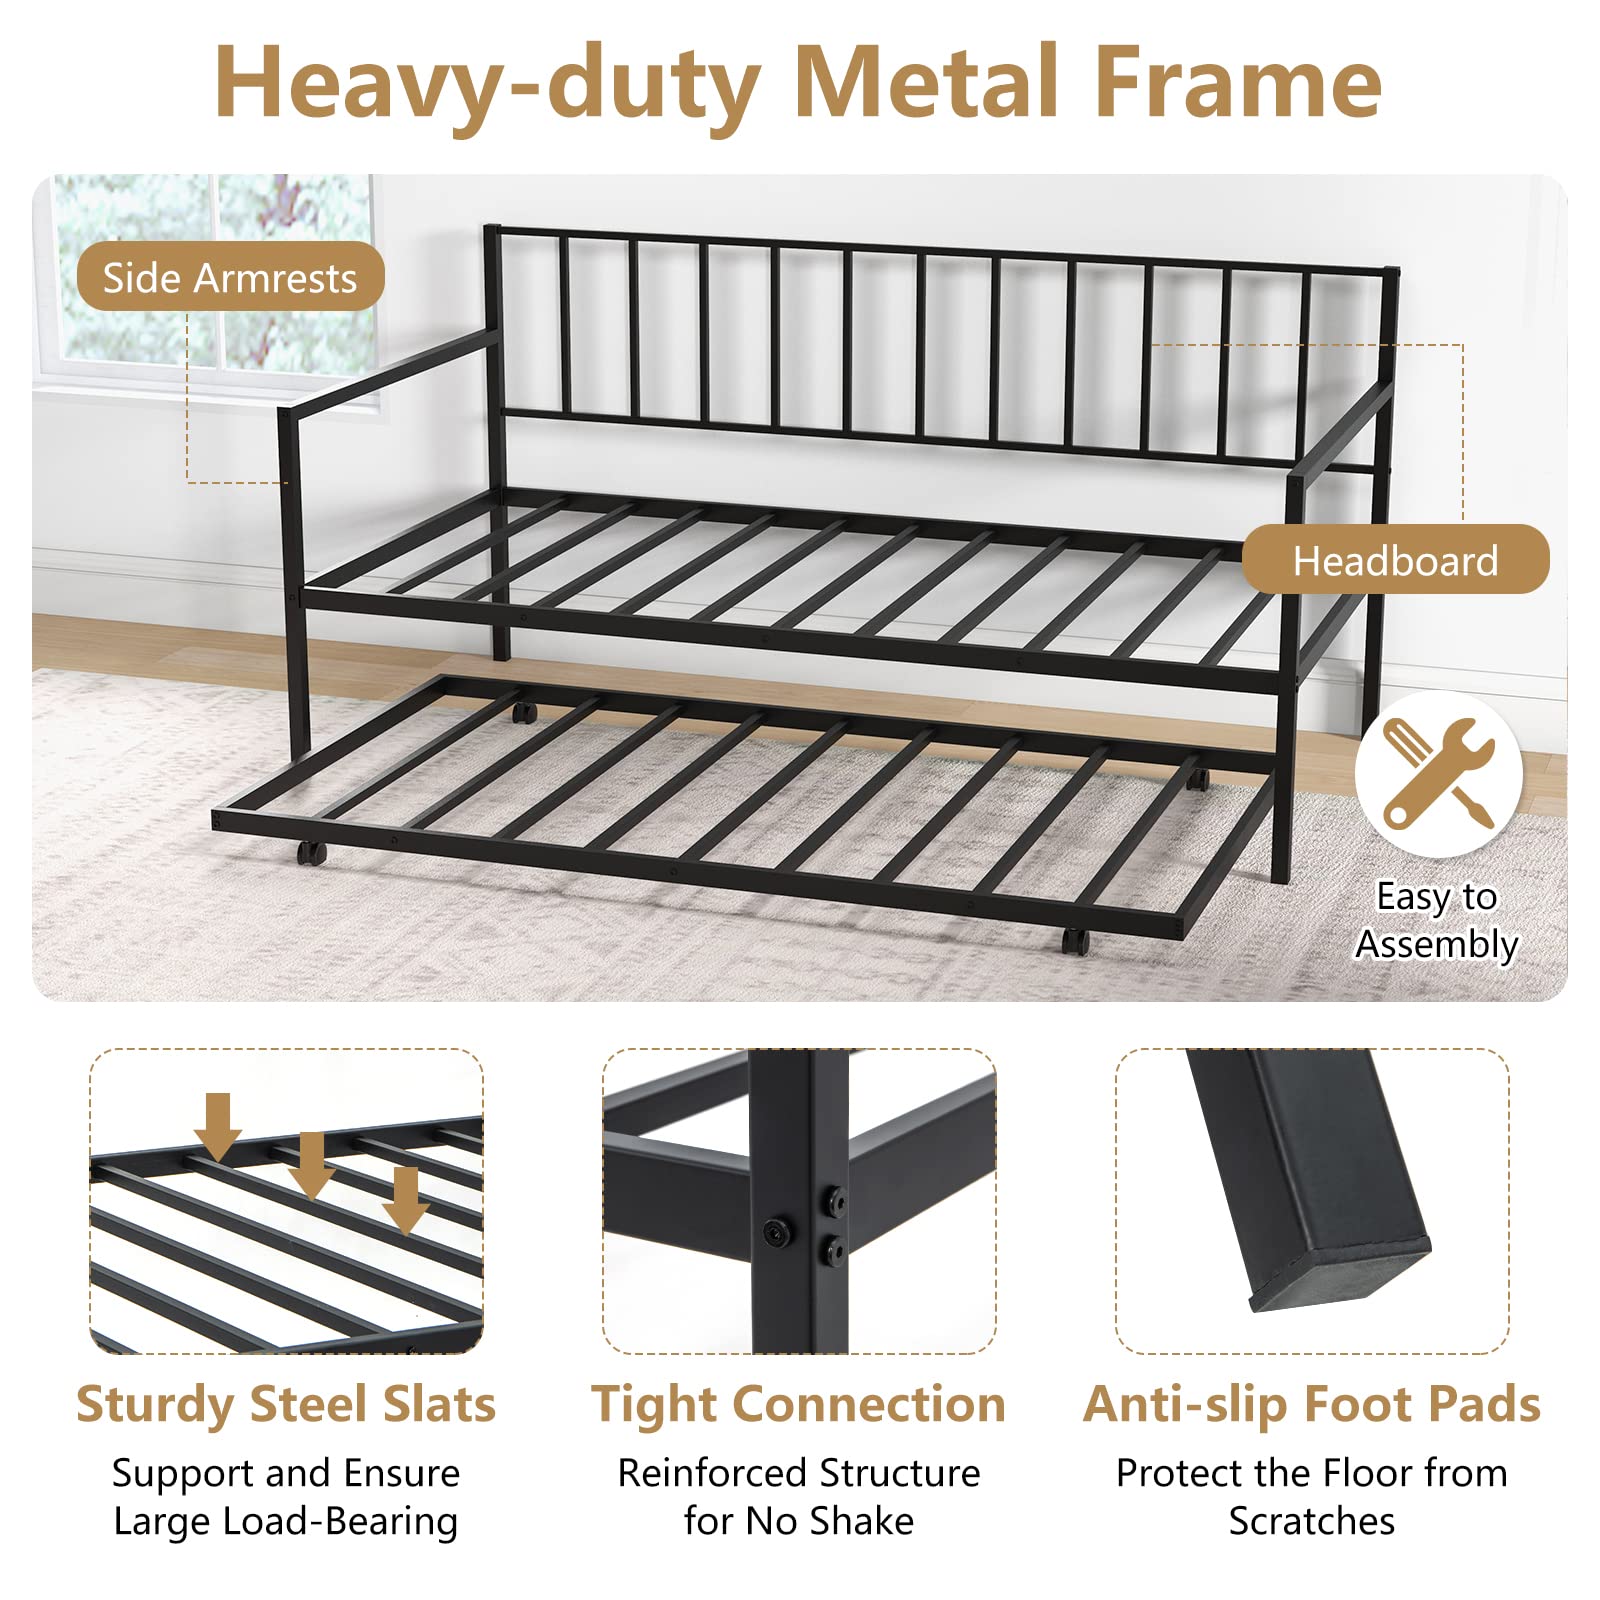 Giantex Metal Daybed with Trundle, Twin Size Daybed with Pullout Trundle & Steel Slat Support, Black